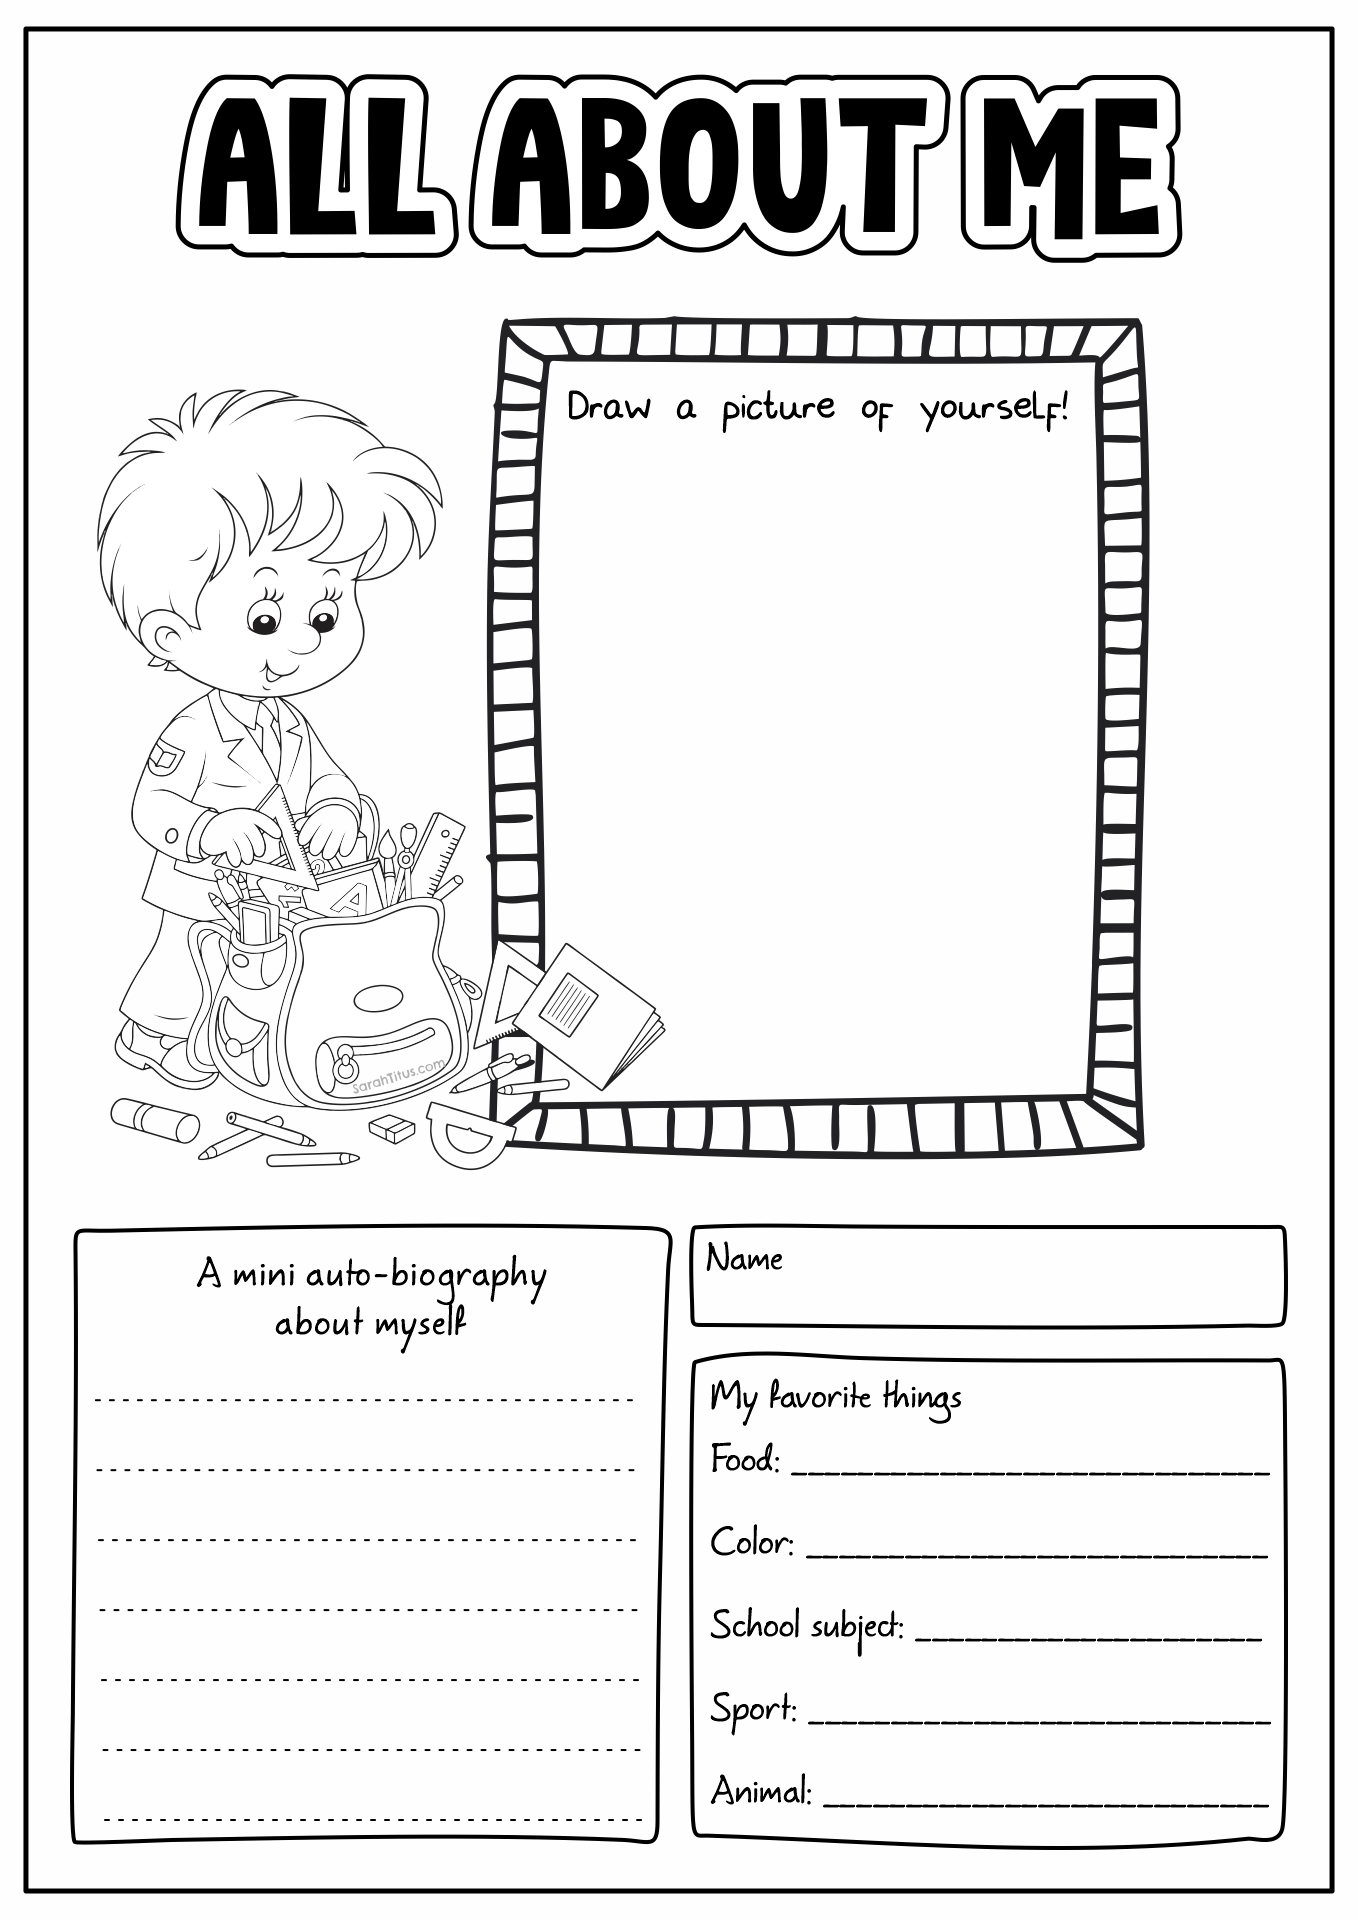 All About Me Worksheets Printables Free Image